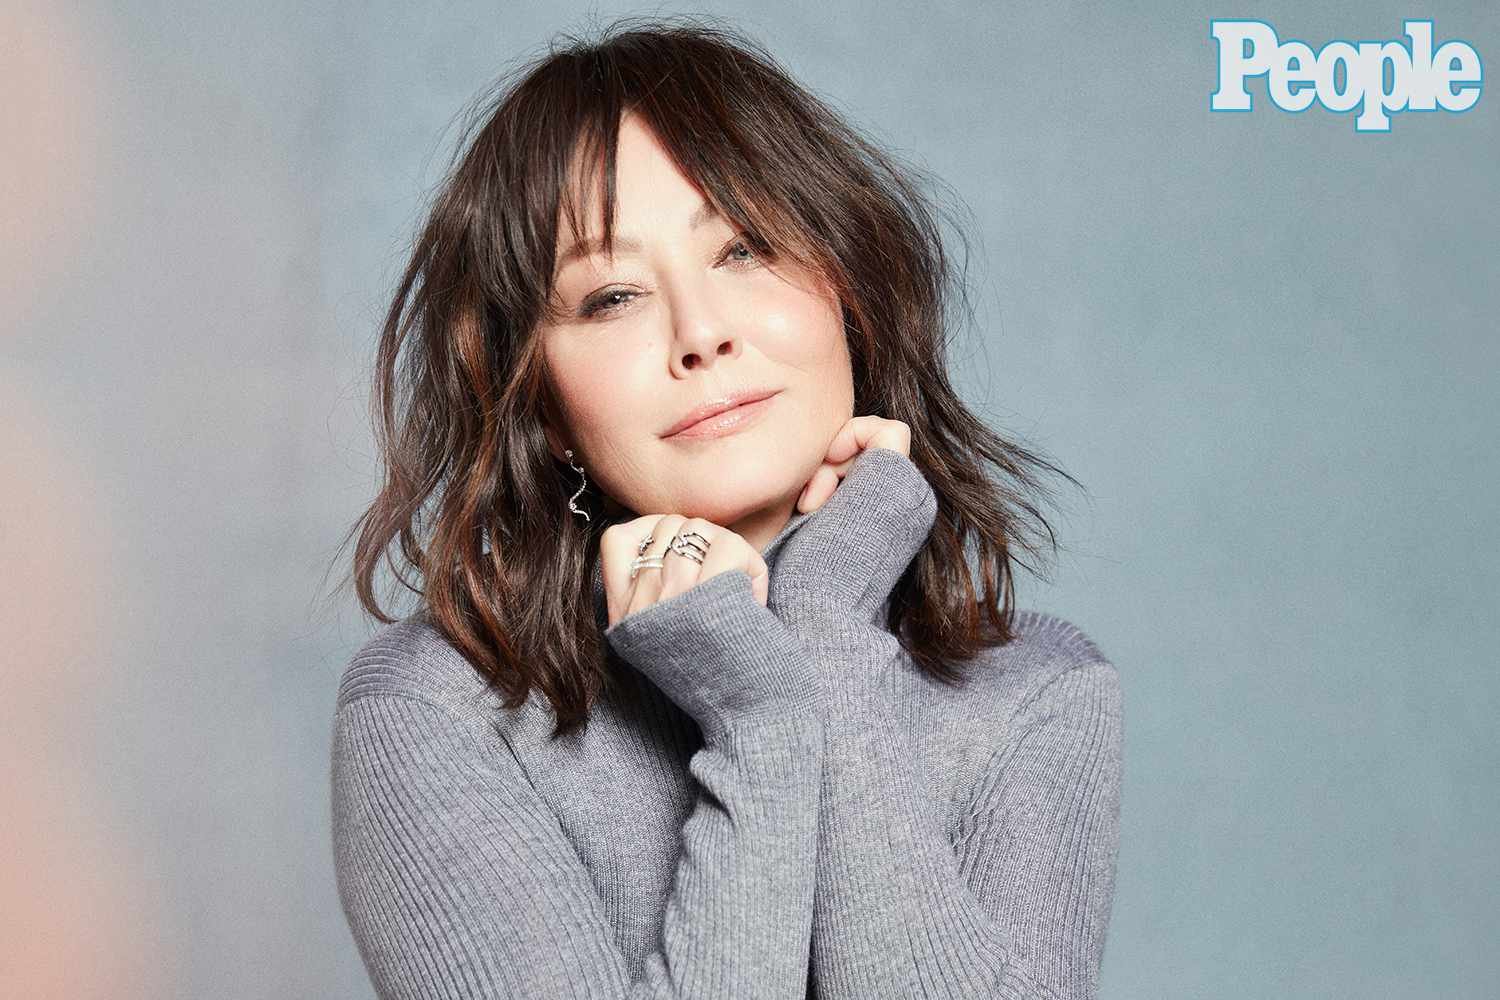 Shannen Doherty's New Podcast Will Explore Cancer, Love and More: 'A Memoir of the Past, Present and Future' (Exclusive)